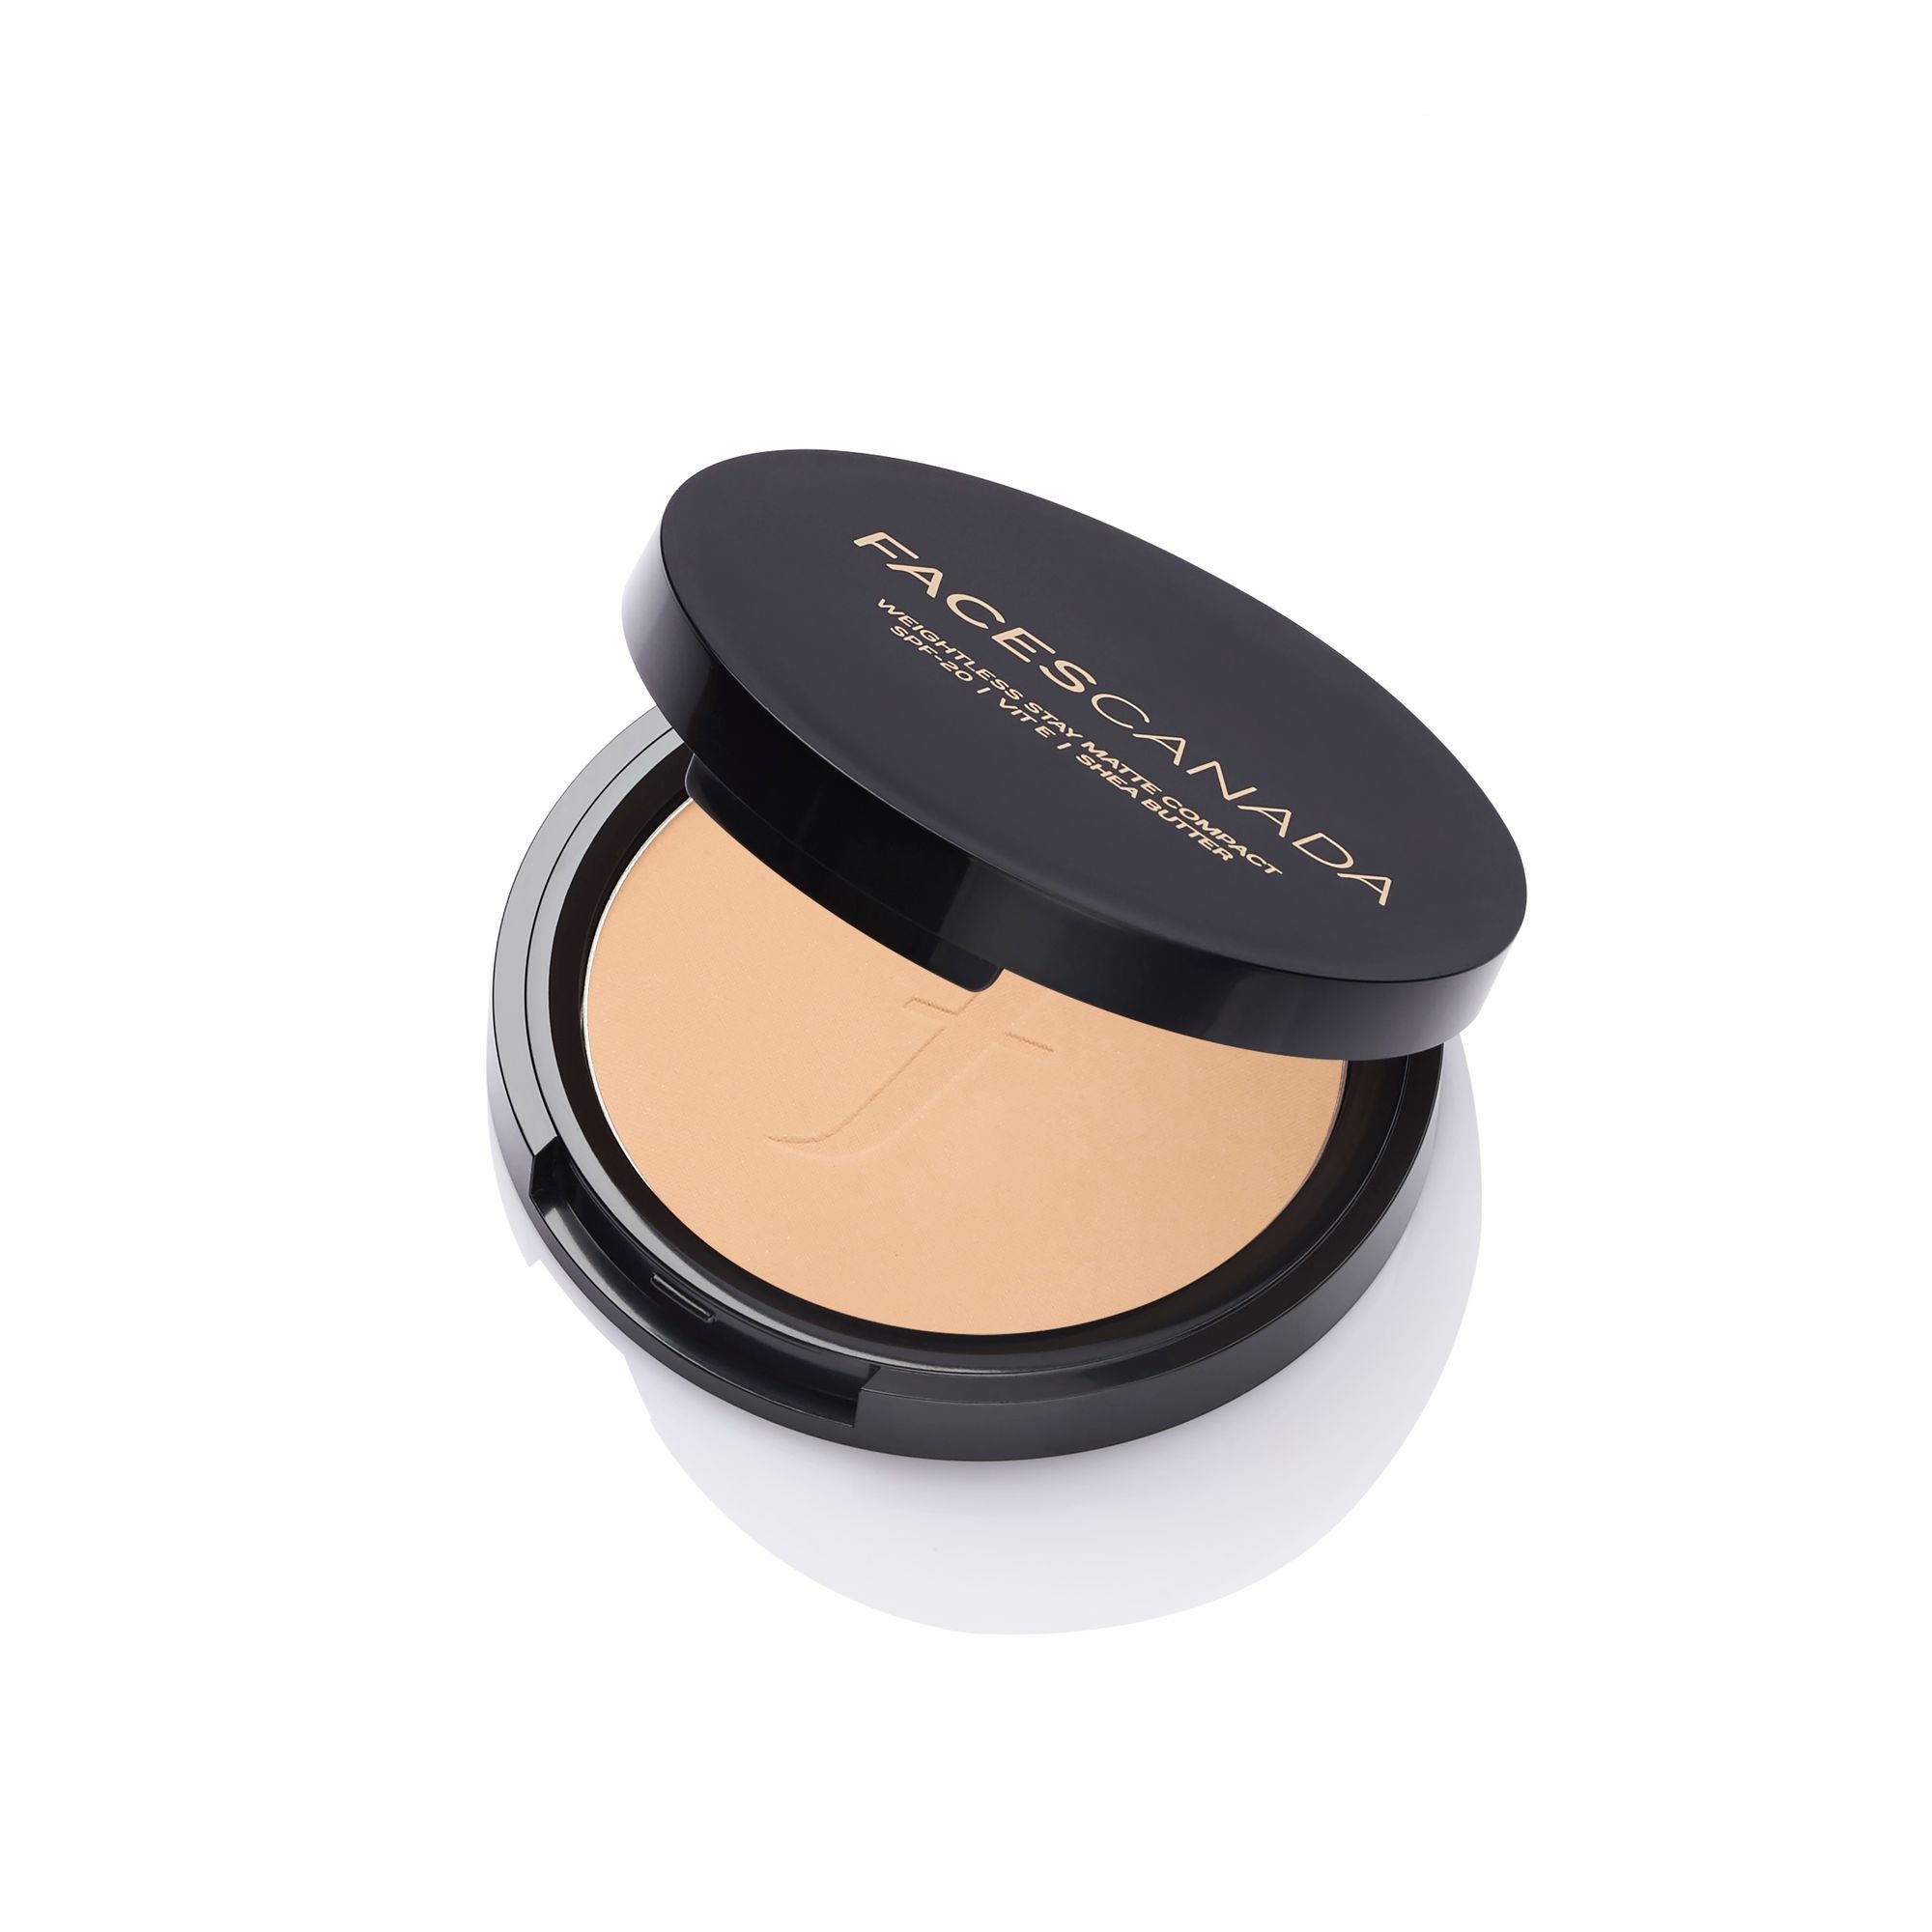 Faces-Canada-Weightless-Stay-Matte-Compact-SPF20-Vitamin-E-Shea-Butter-9g Faces-Canada